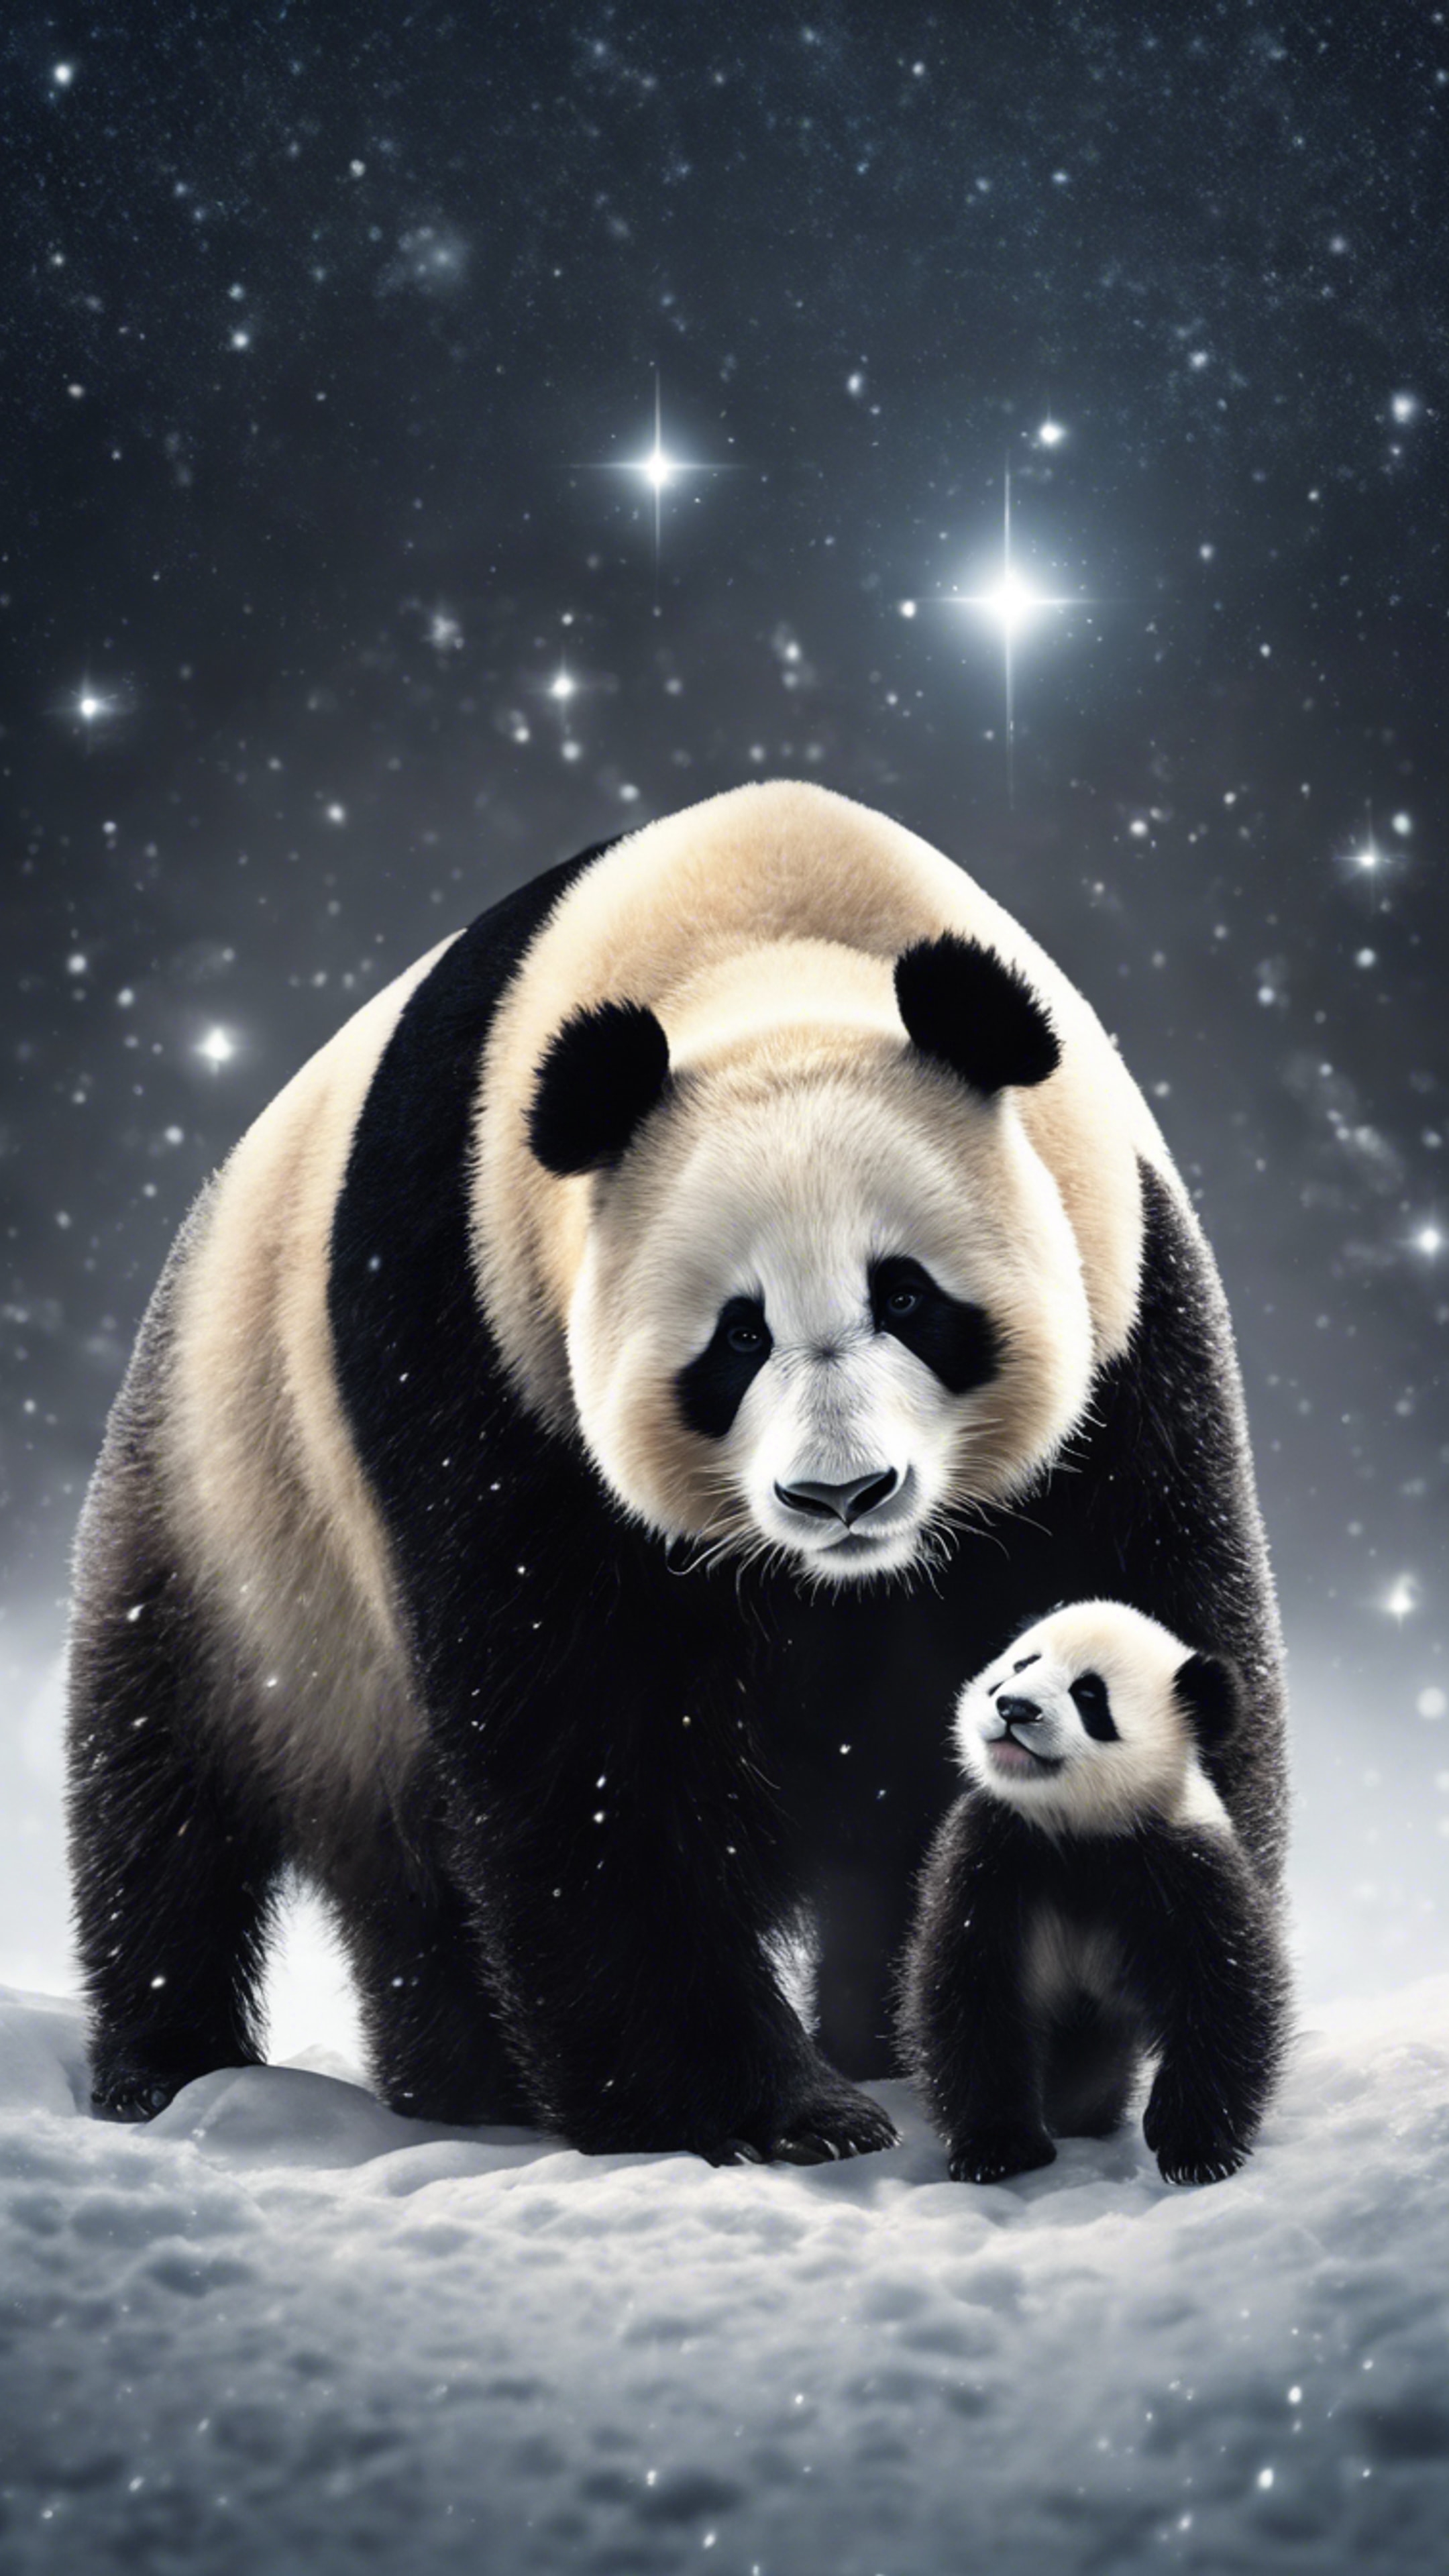 A mother panda with her cubs, peacefully taking a stroll on a silent, snowy night under a blanket of stars. Kertas dinding[875b5ef660eb48ddb691]